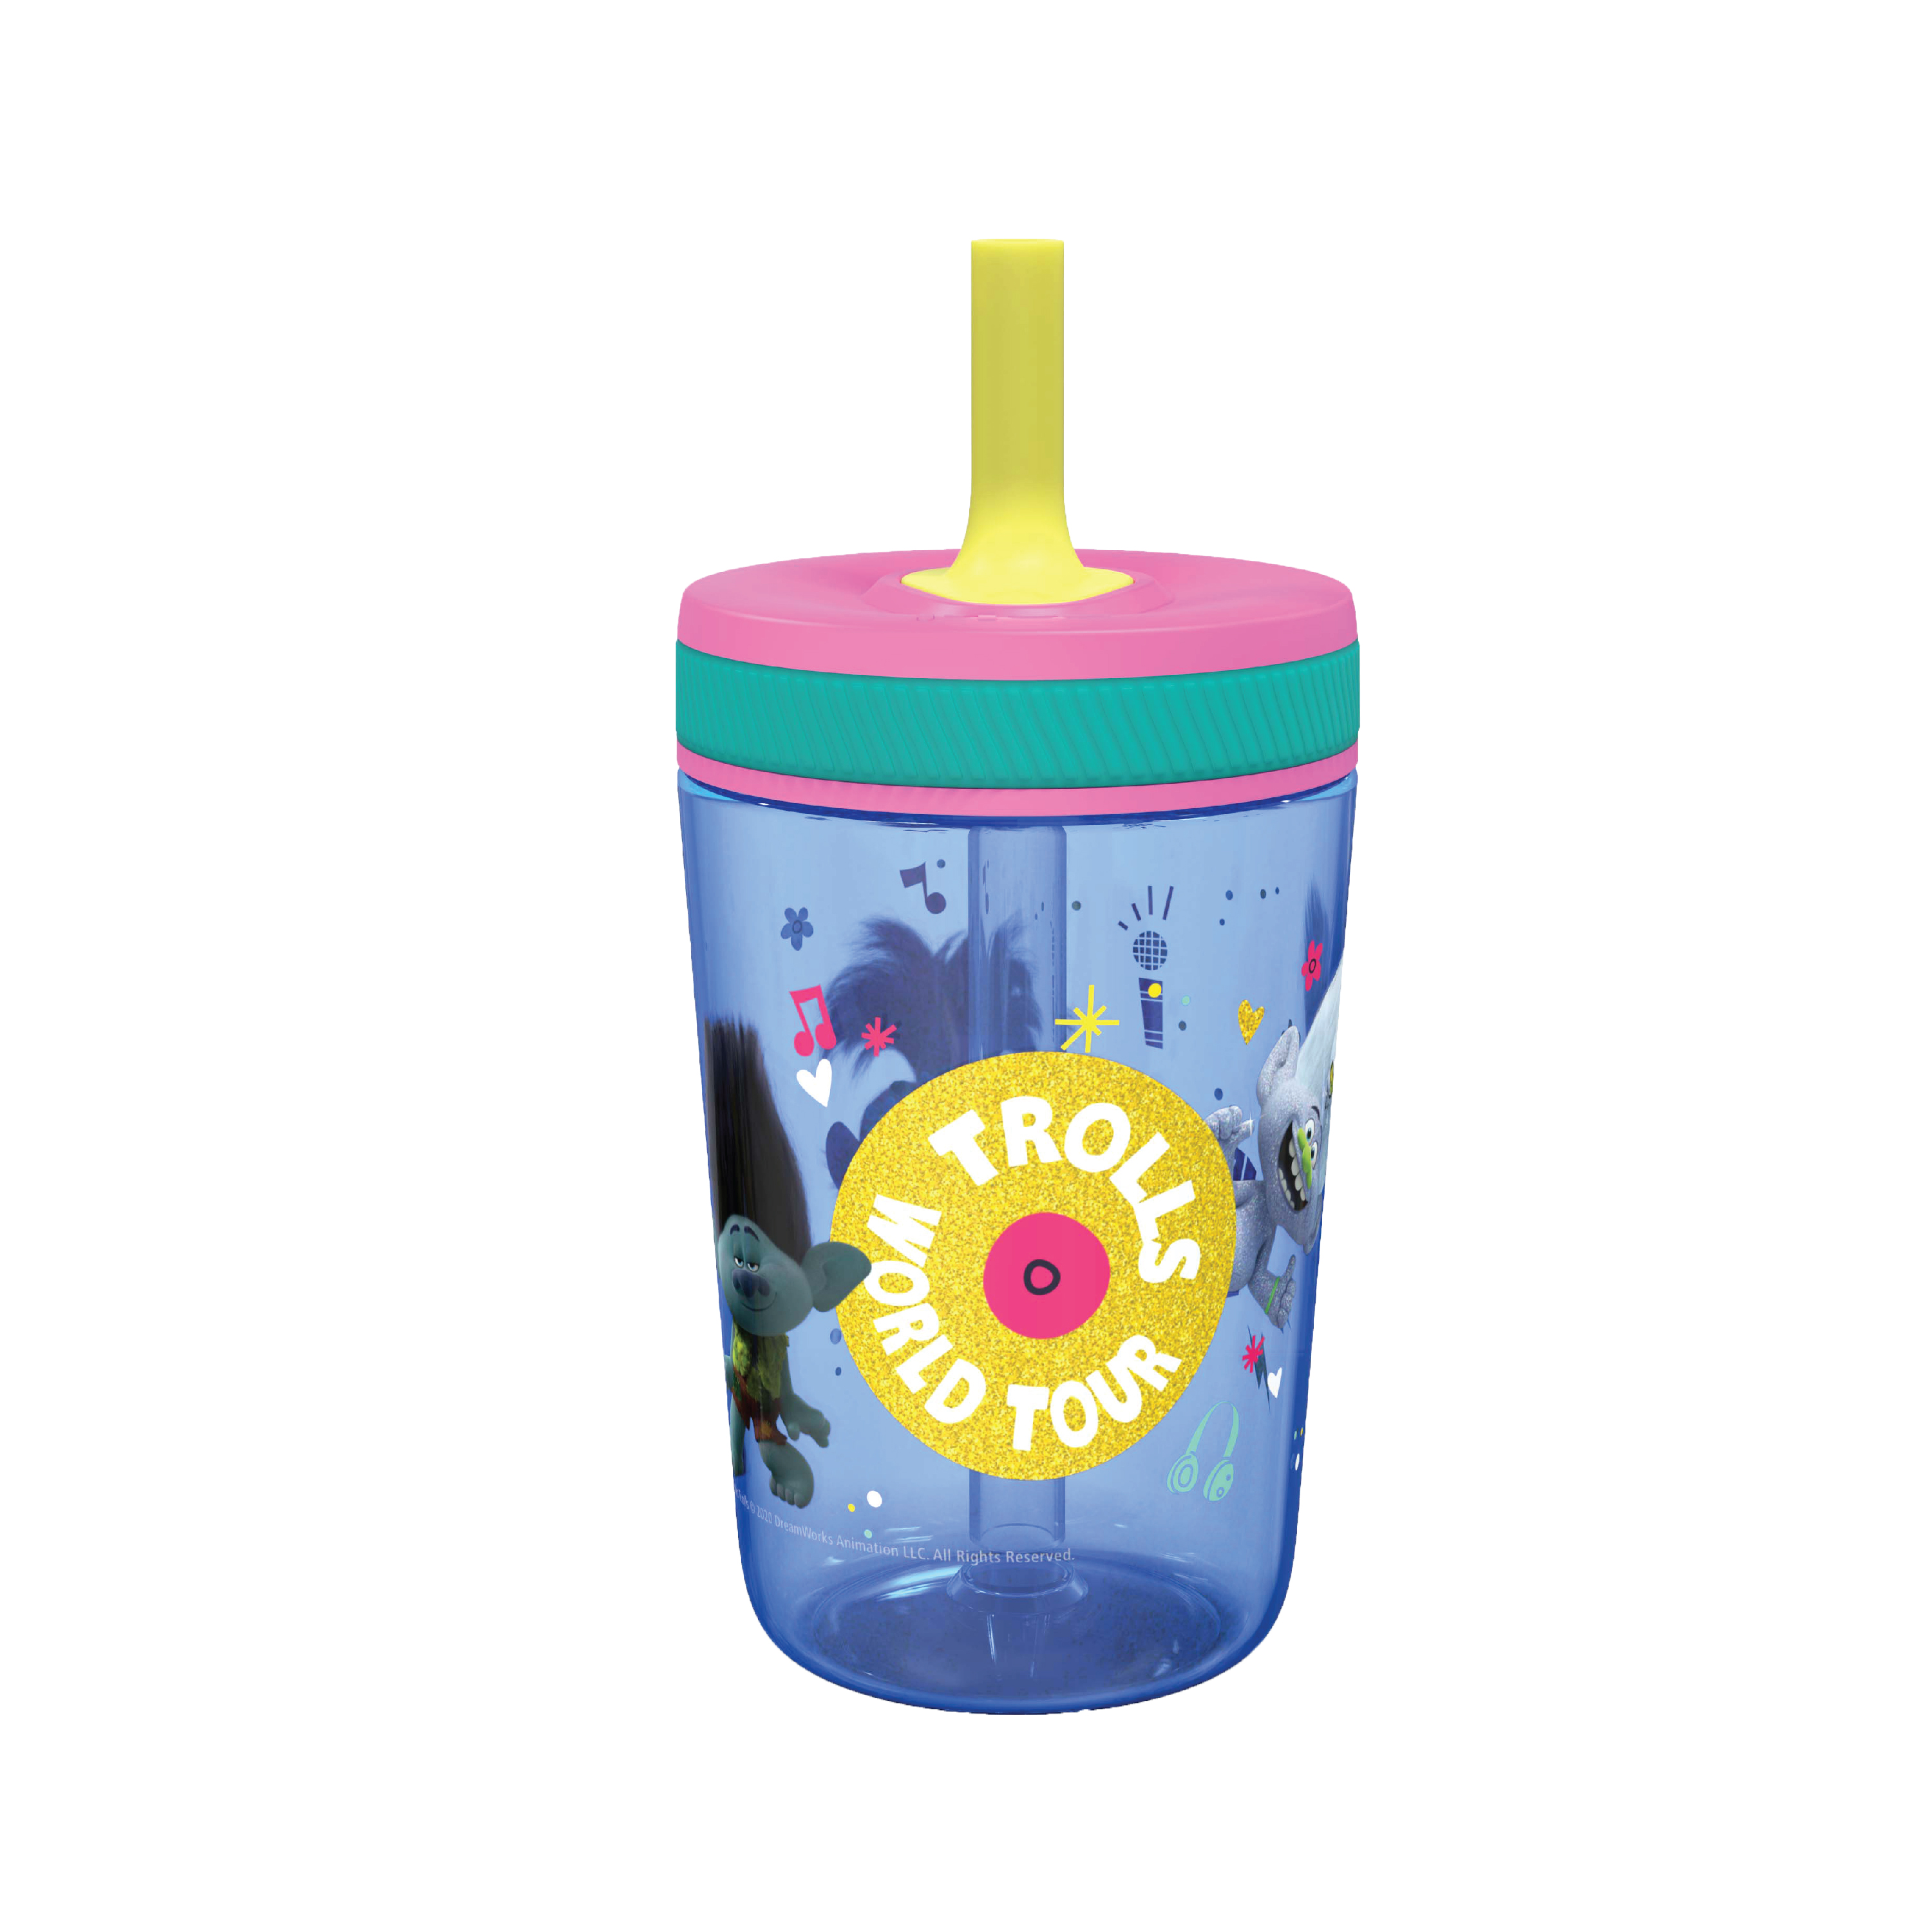 Trolls 2 Movie 15  ounce Plastic Tumbler with Lid and Straw, Poppy and Friends, 2-piece set slideshow image 2